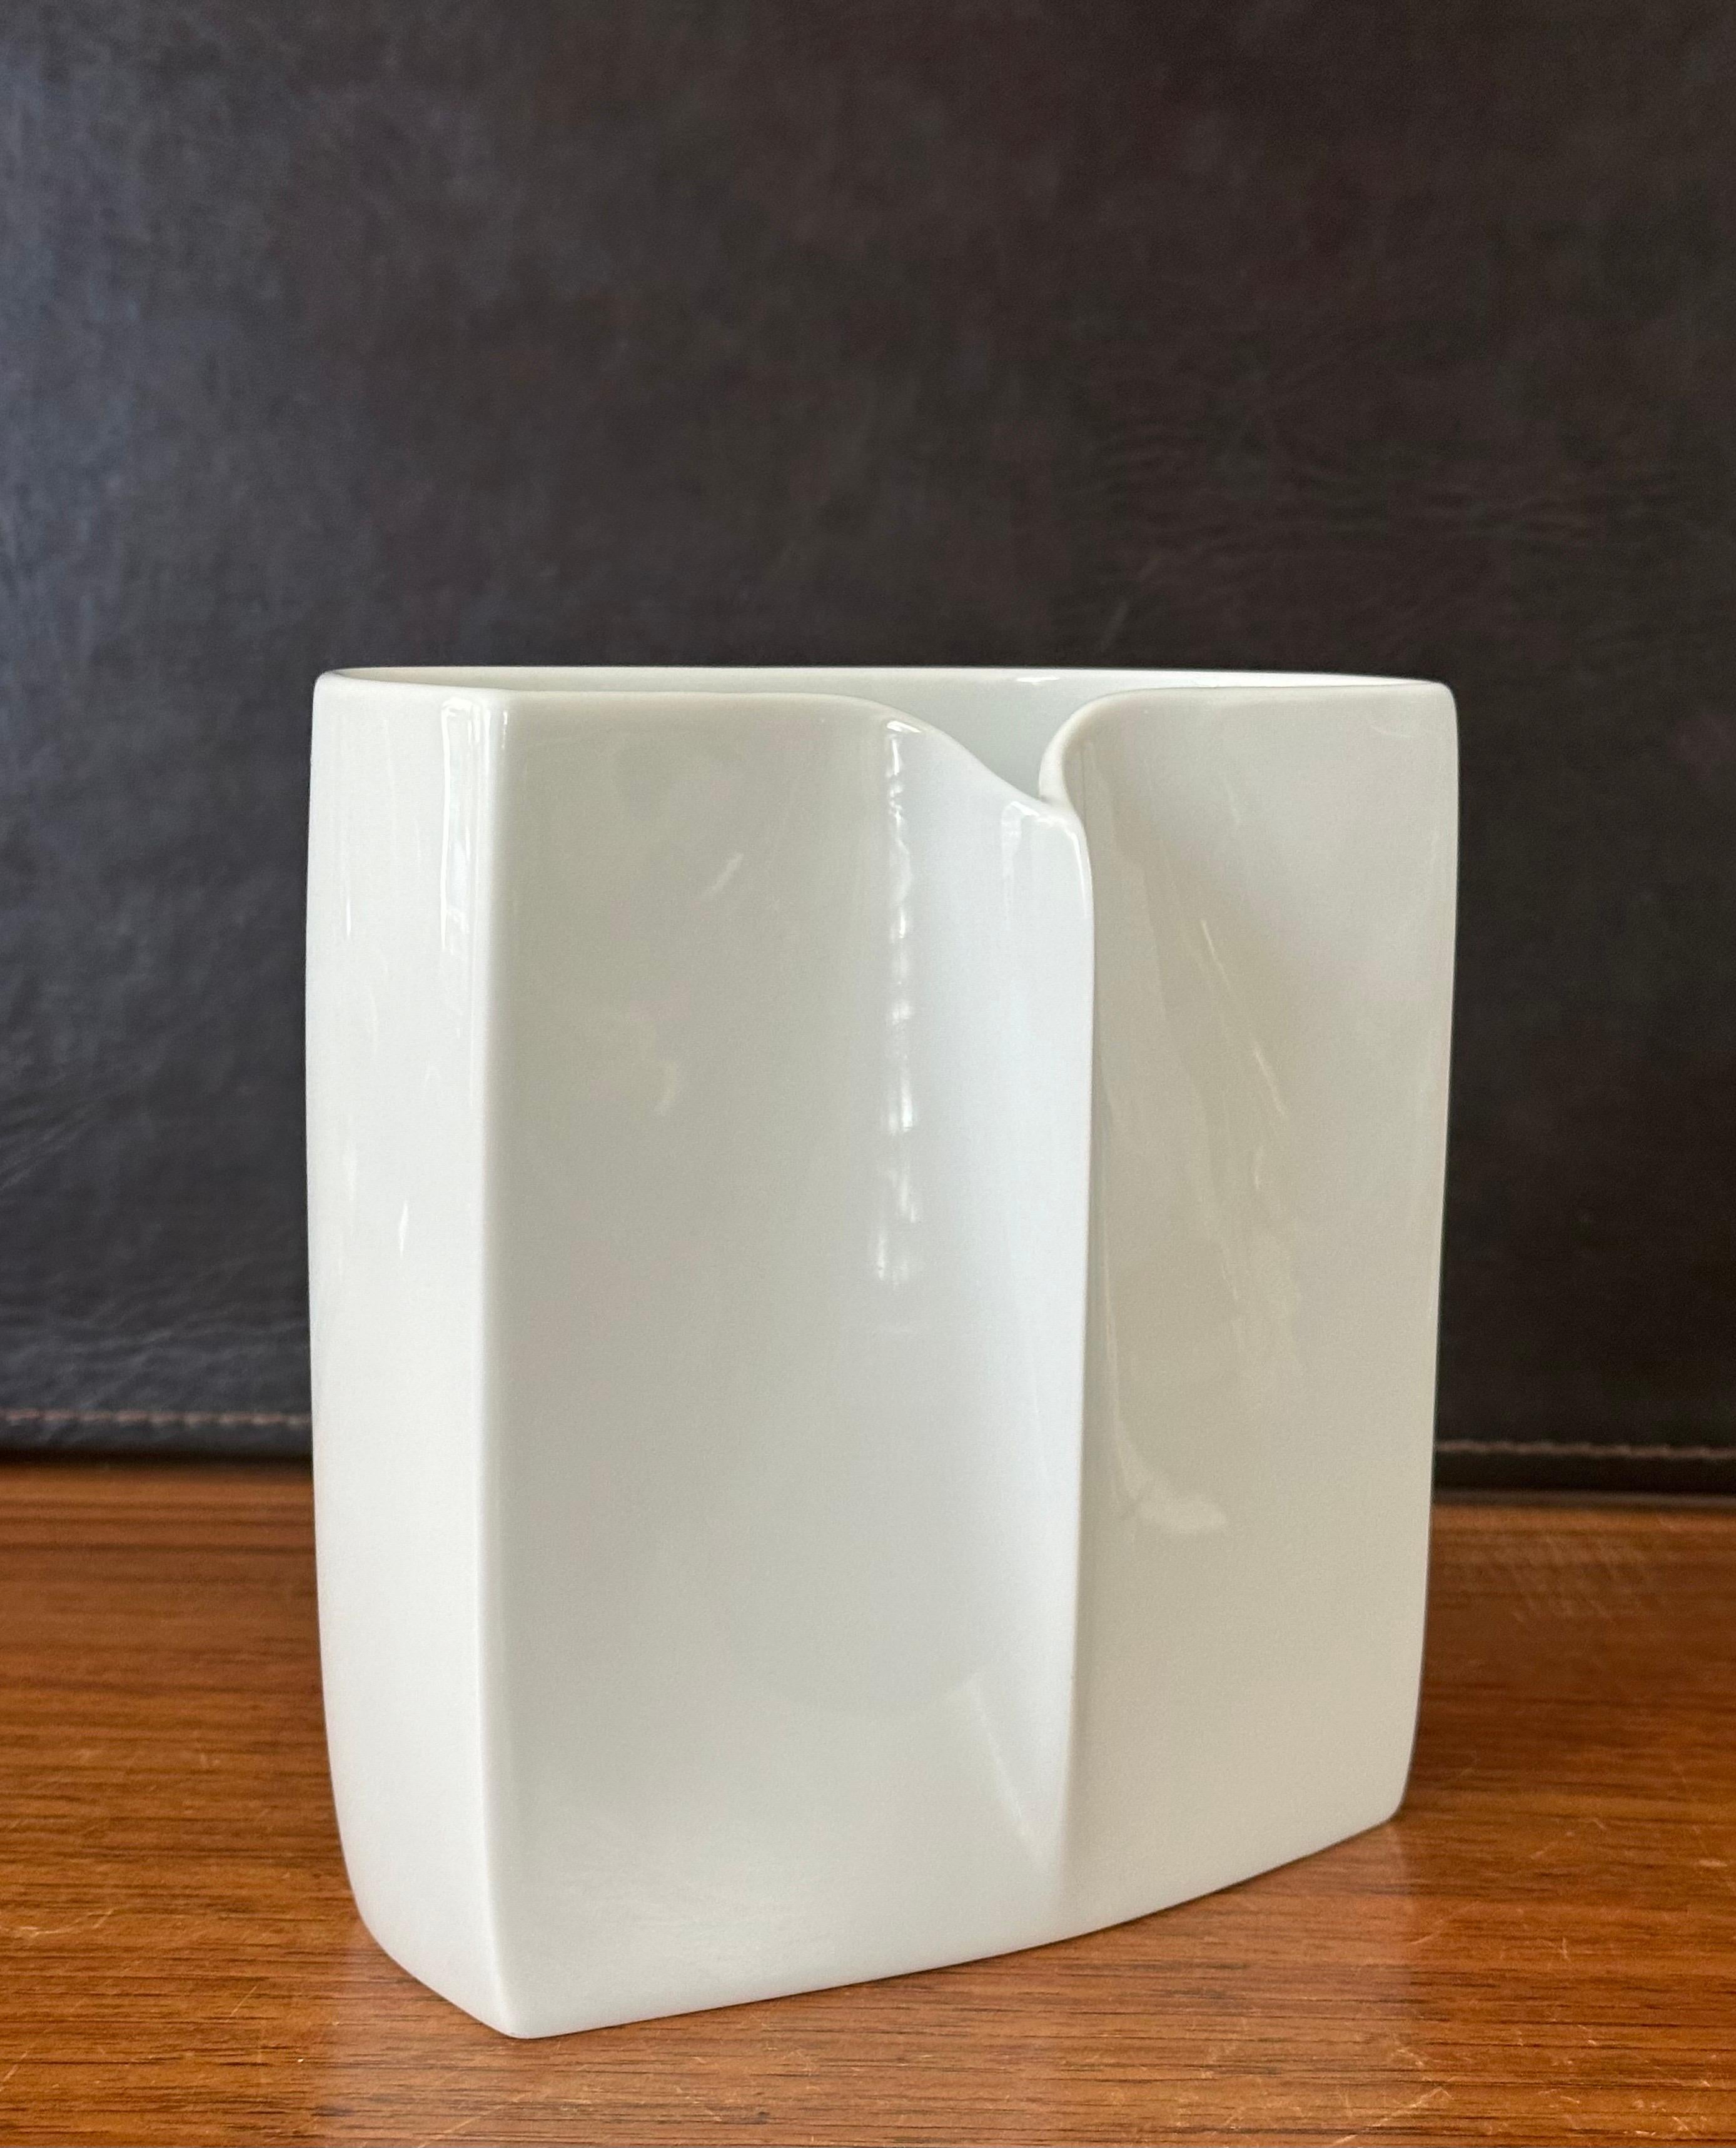 Modernist White Porcelain Vase by Rosenthal Studio-Linie In Good Condition For Sale In San Diego, CA